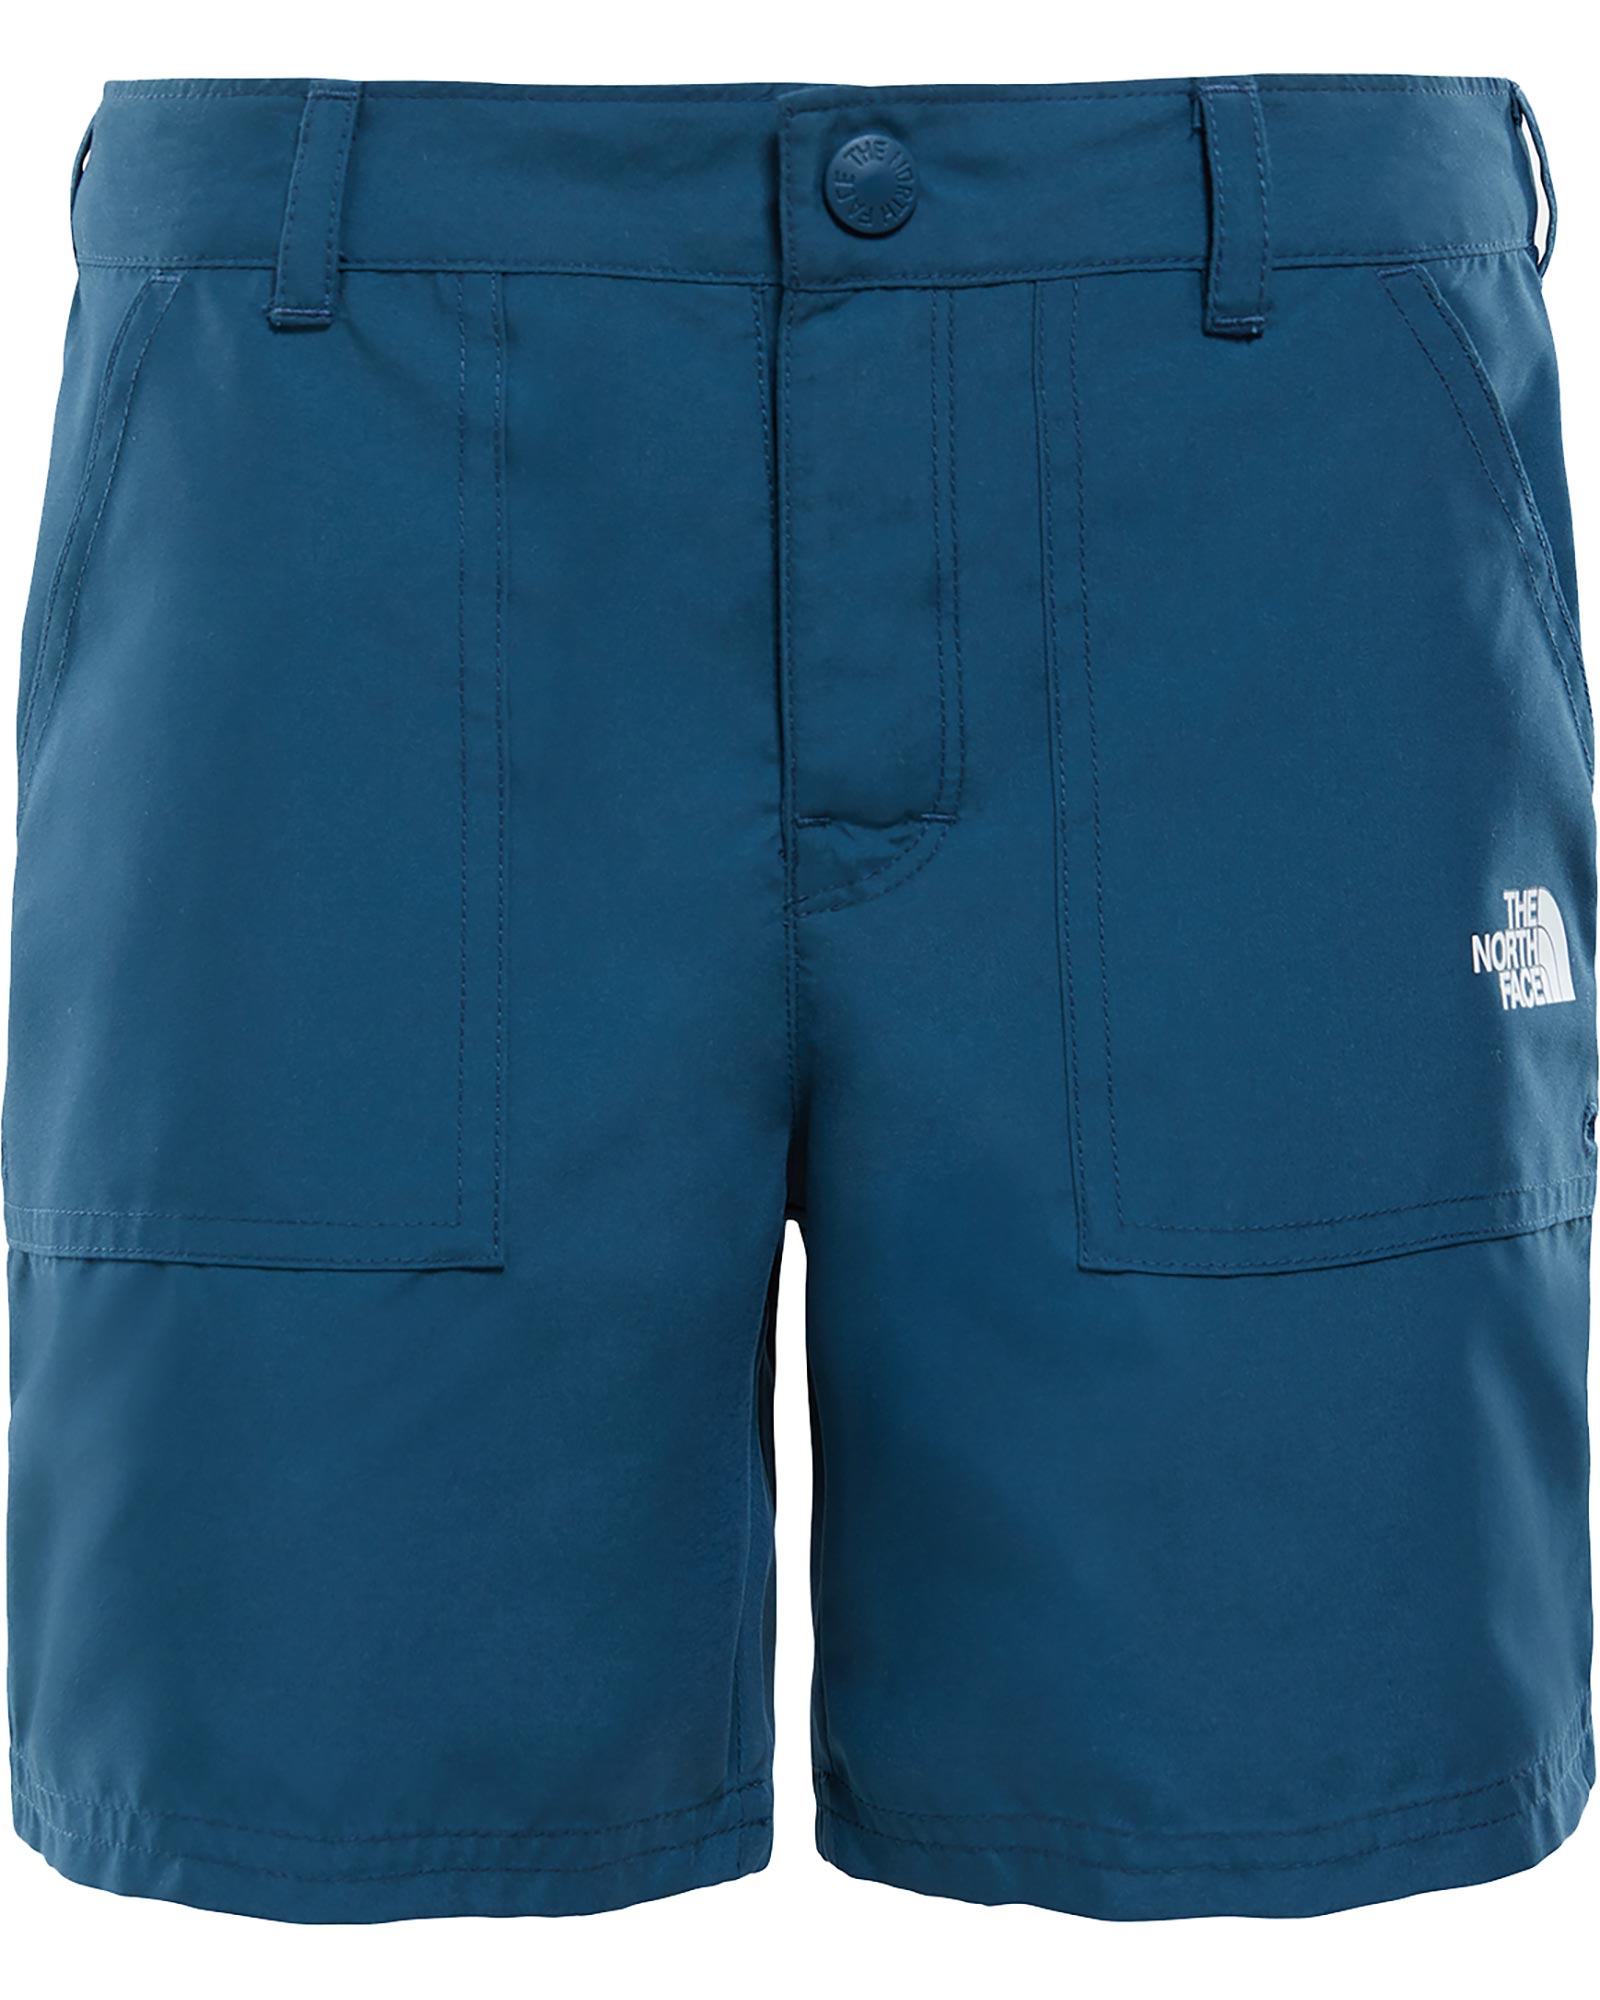 The North Face Amphibious Girls’ Shorts - Blue Wing Teal M